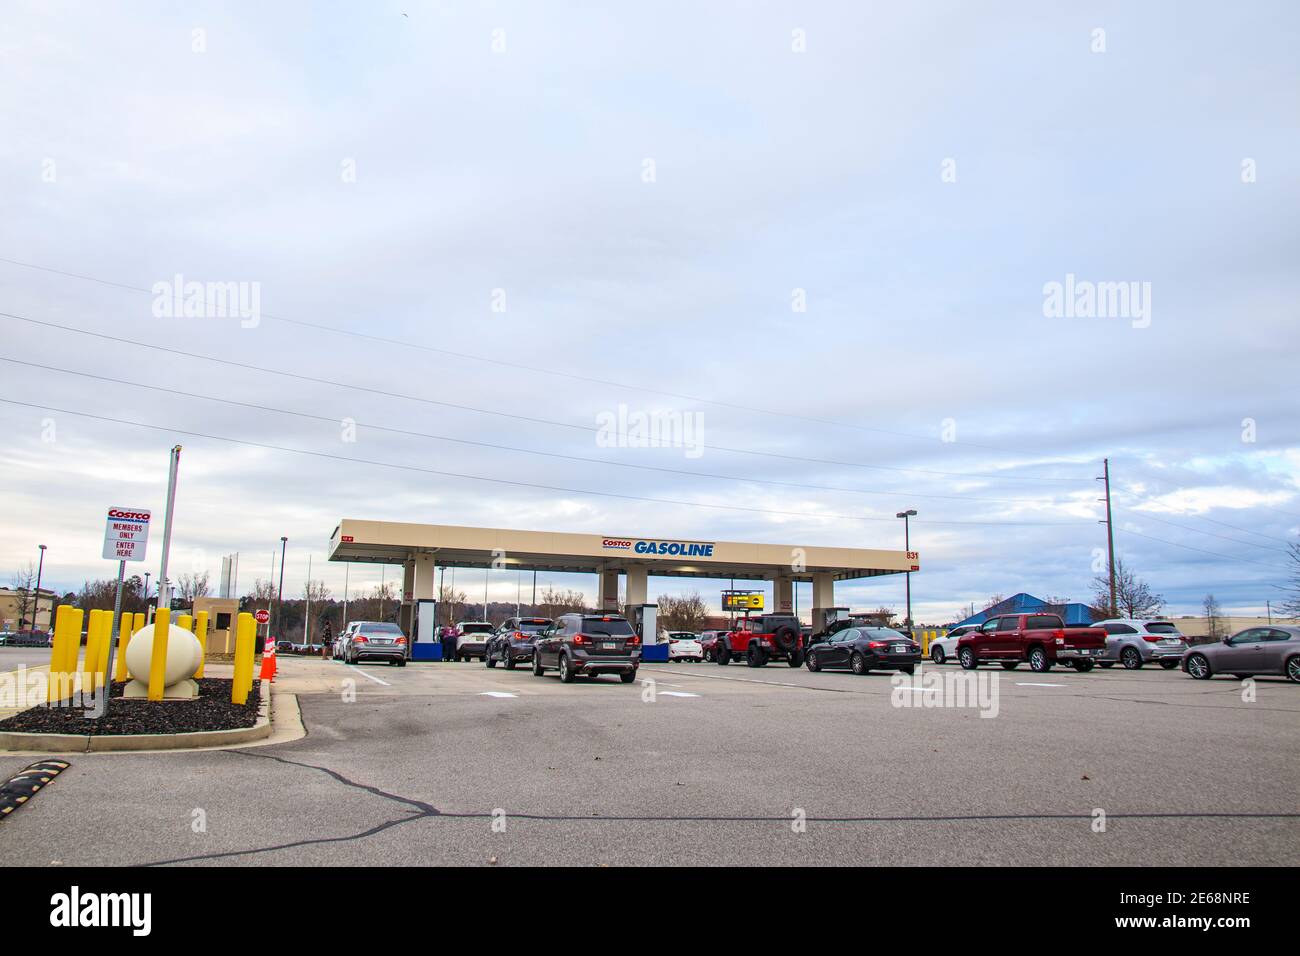 Augusta, Ga USA 01 07 21: Costco Wholesale retail store gas station lines at the gas pumps Stock Photo